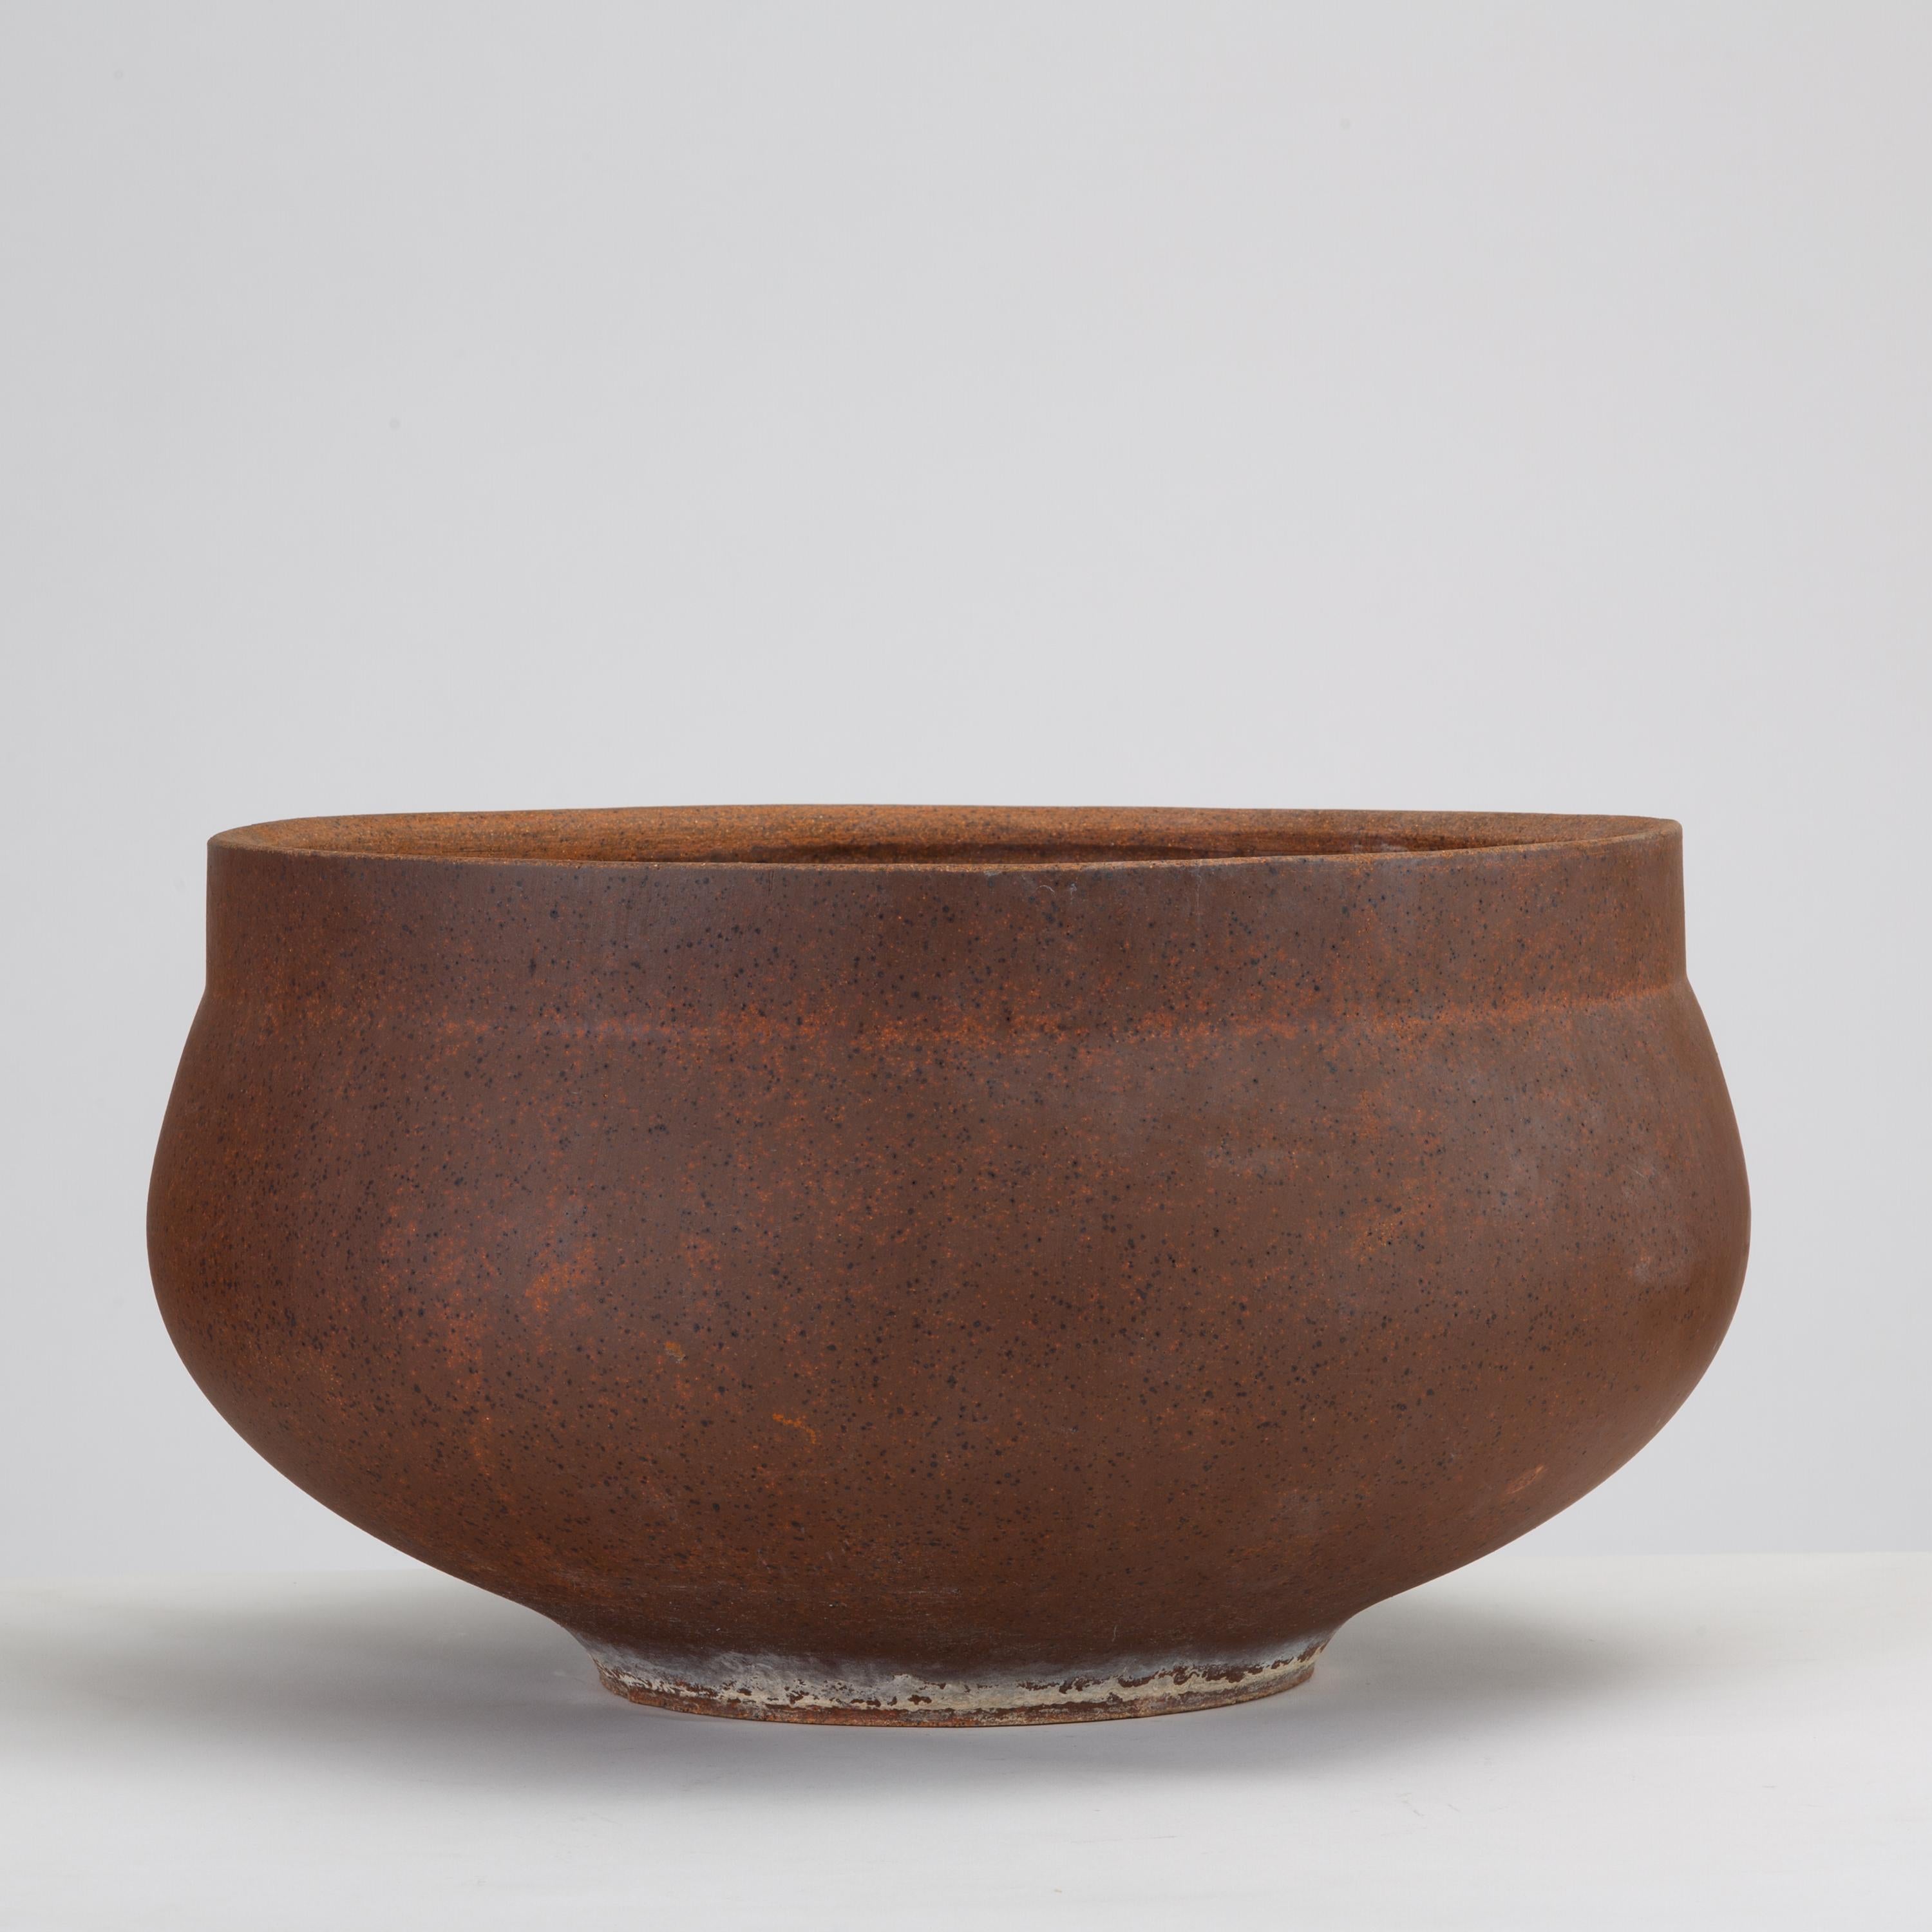 A single ceramic bowl planter from David Cressey's Pro/Artisan collection for Architectural Pottery. The unglazed planter has slightly bowed sides and a flattened lip. Listed price is for a single planter. 

Condition: Excellent vintage condition;